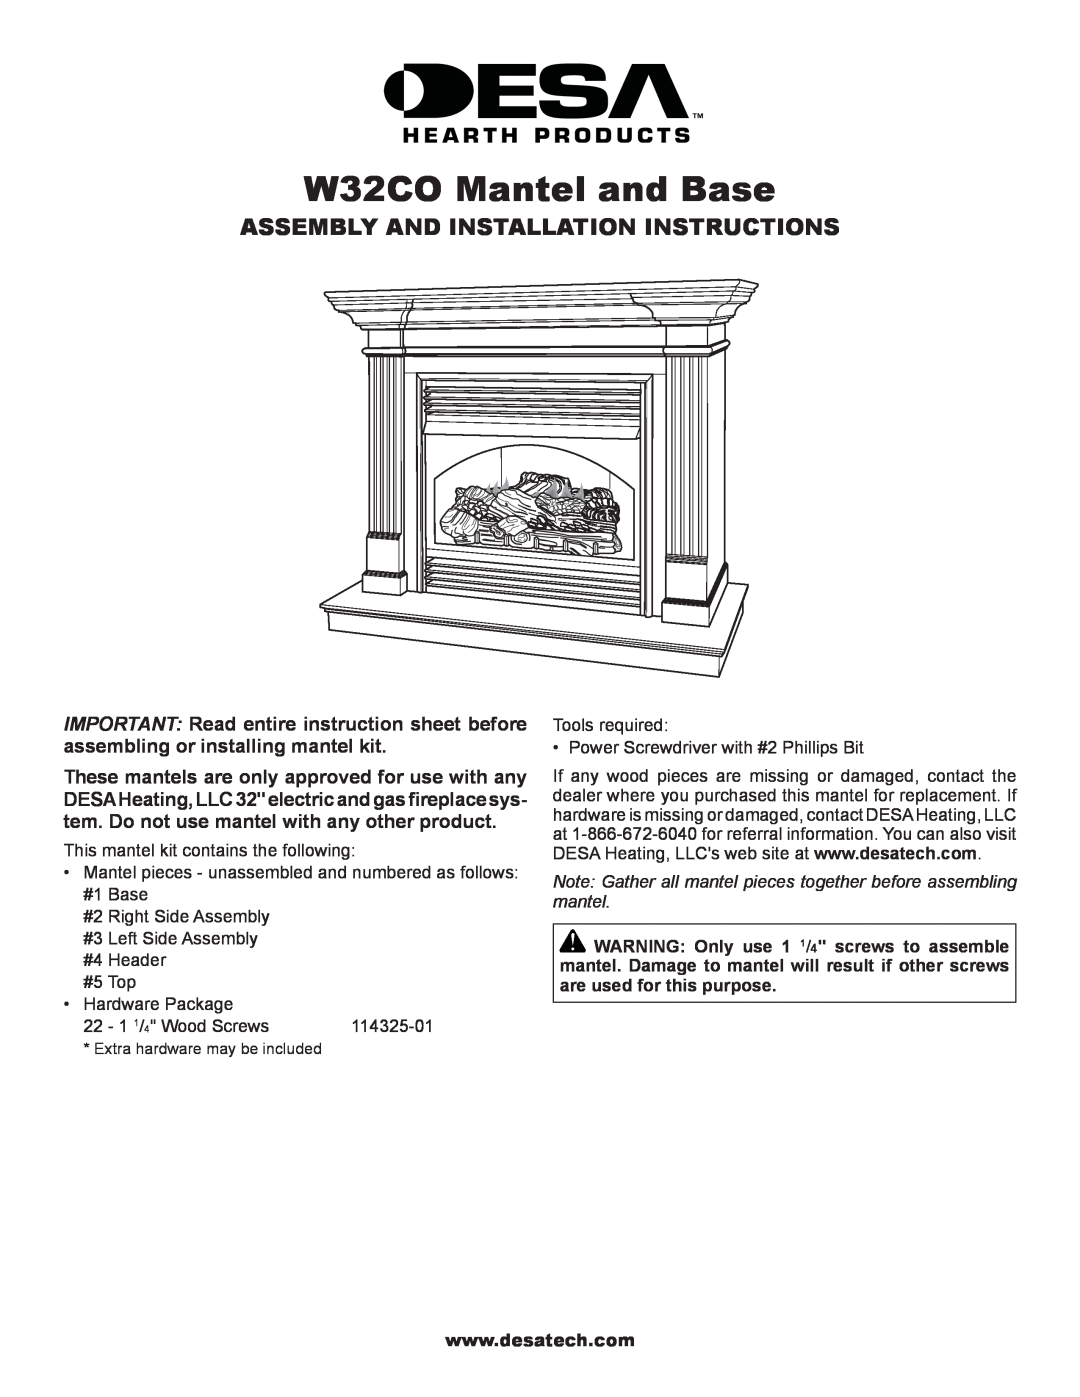 Desa installation instructions W32CO Mantel and Base, Assembly And Installation Instructions 